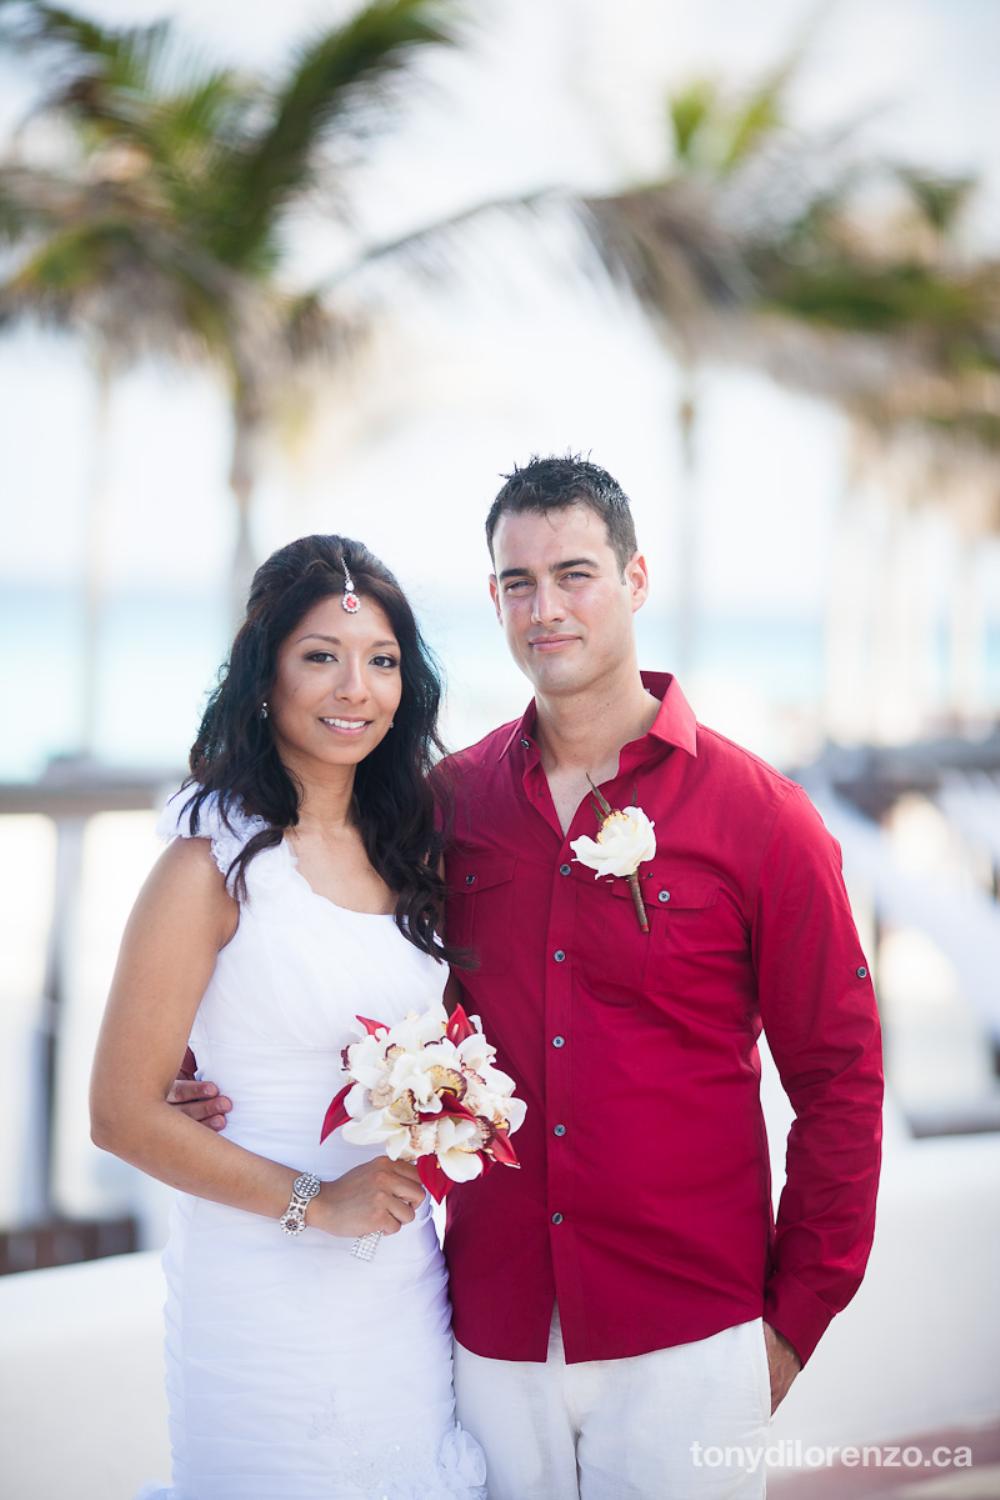 More information about "Priyanka and Cliff Get Married at Gran Caribe Real Cancun"